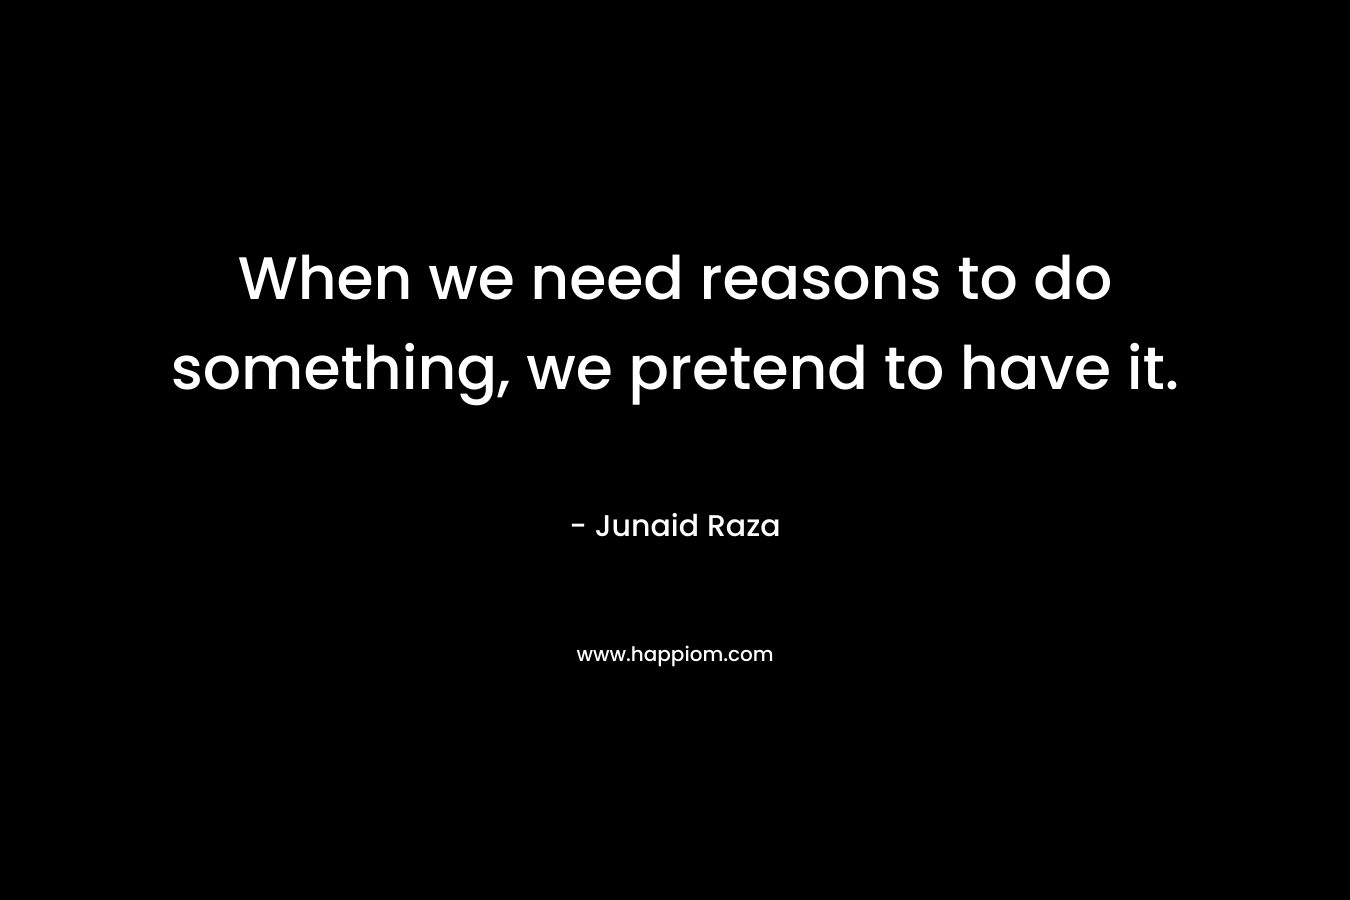 When we need reasons to do something, we pretend to have it.